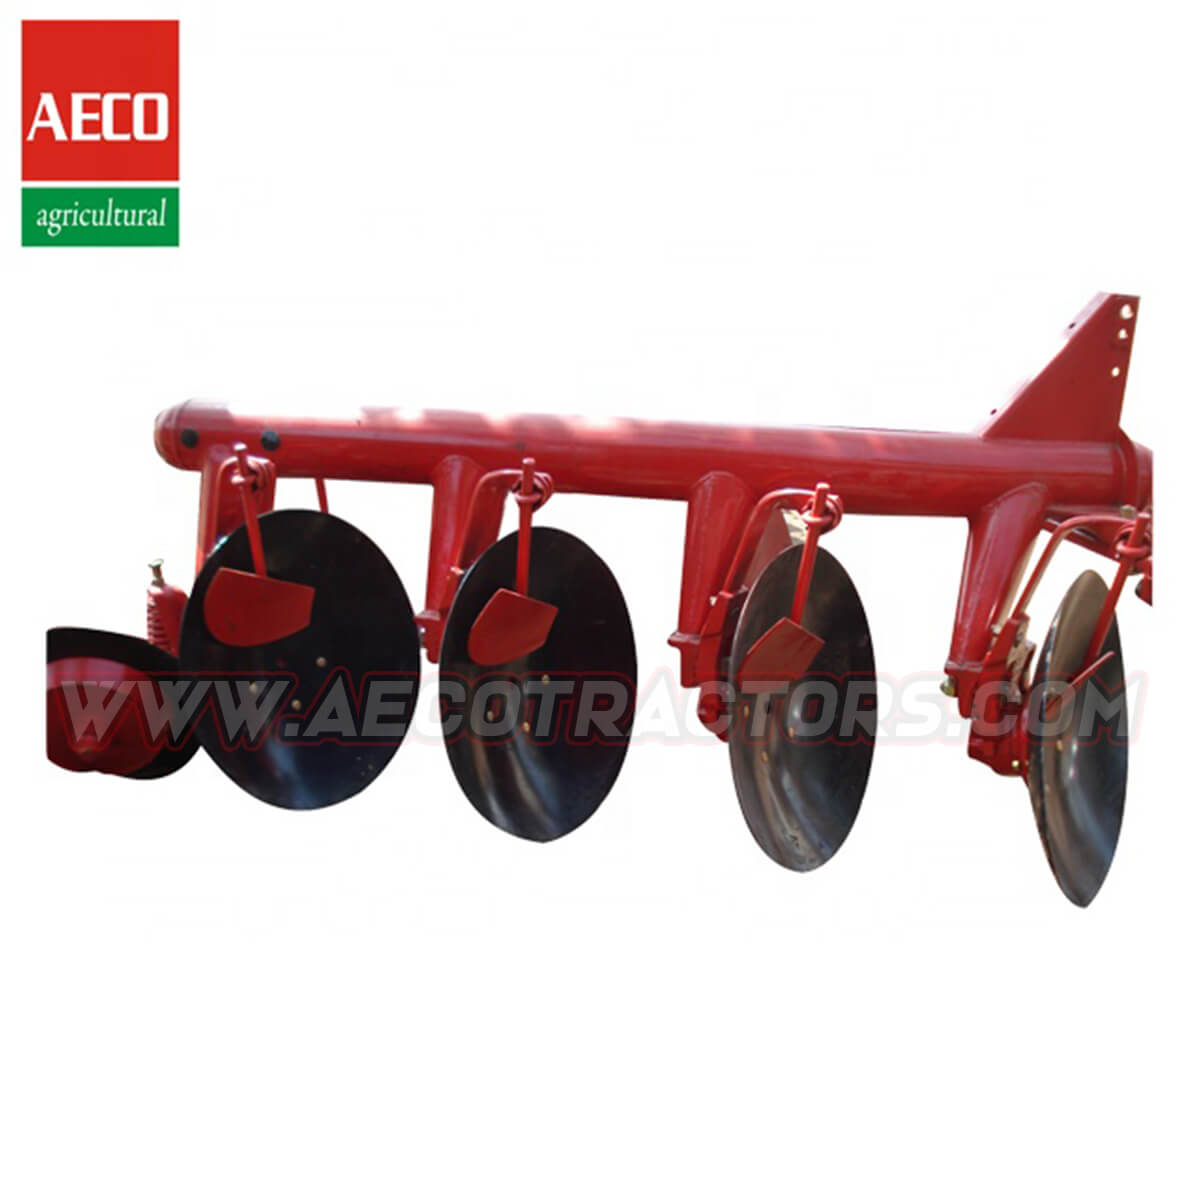 4 DISC PLOUGH FOR TRACTOR